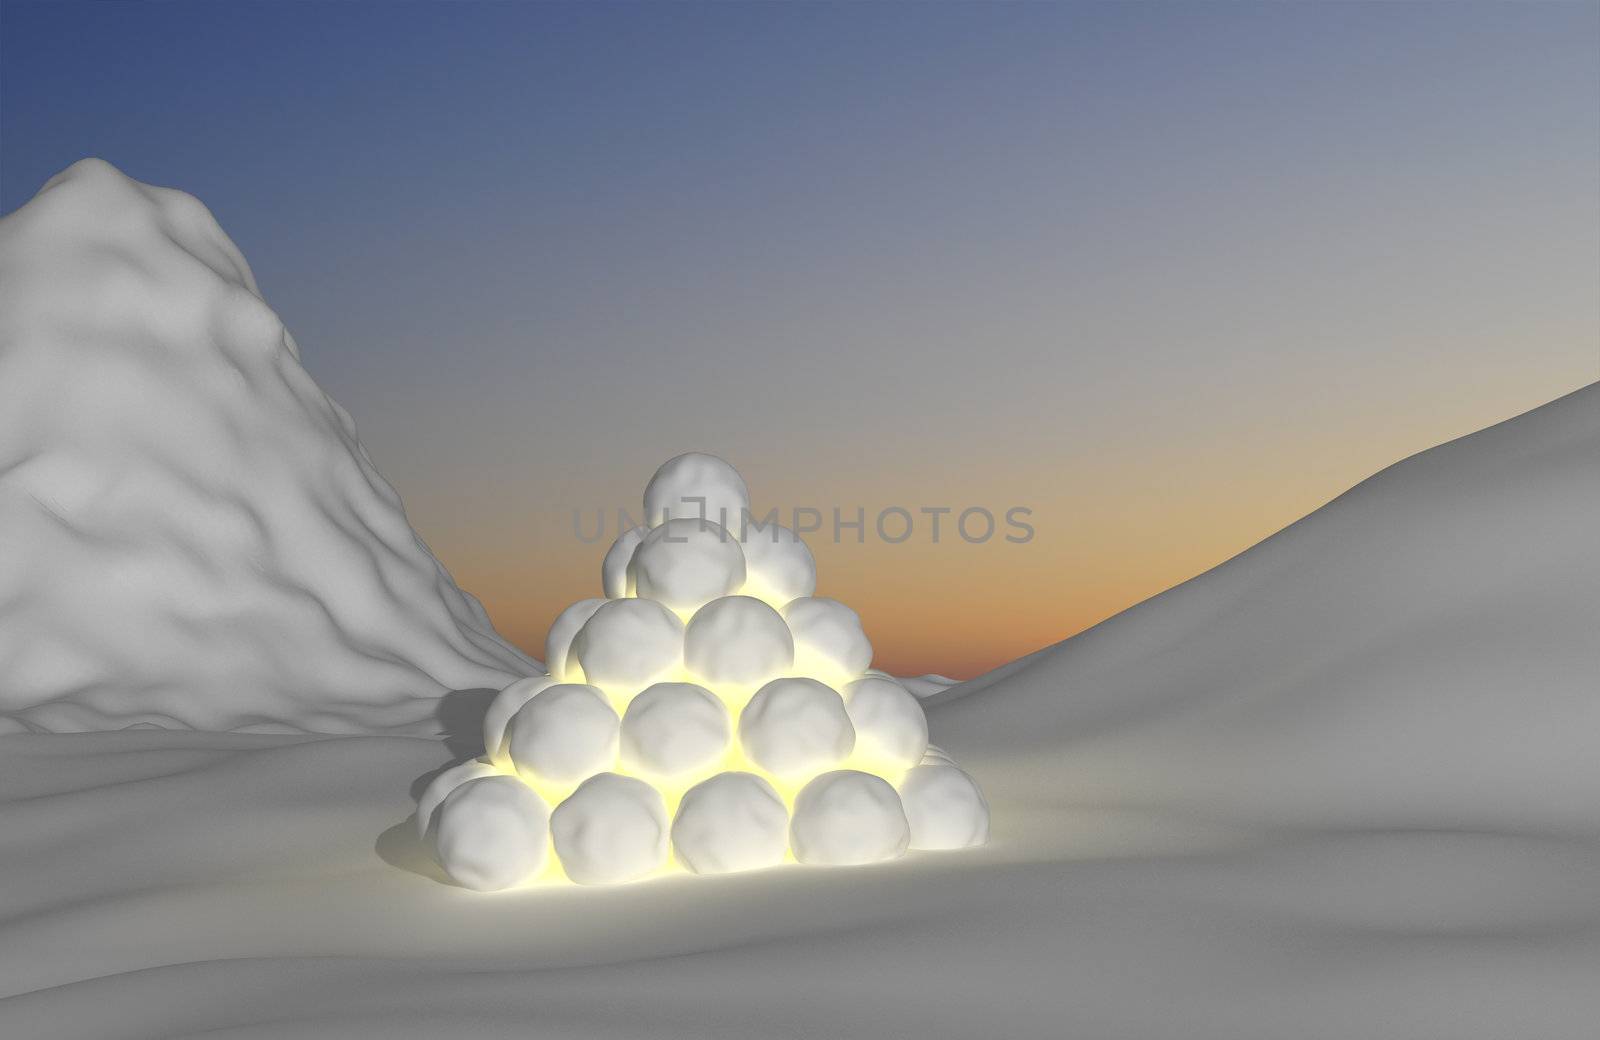 Lantern/lamp made of snowballs with candle light inside.  Snowy landscape and sunset